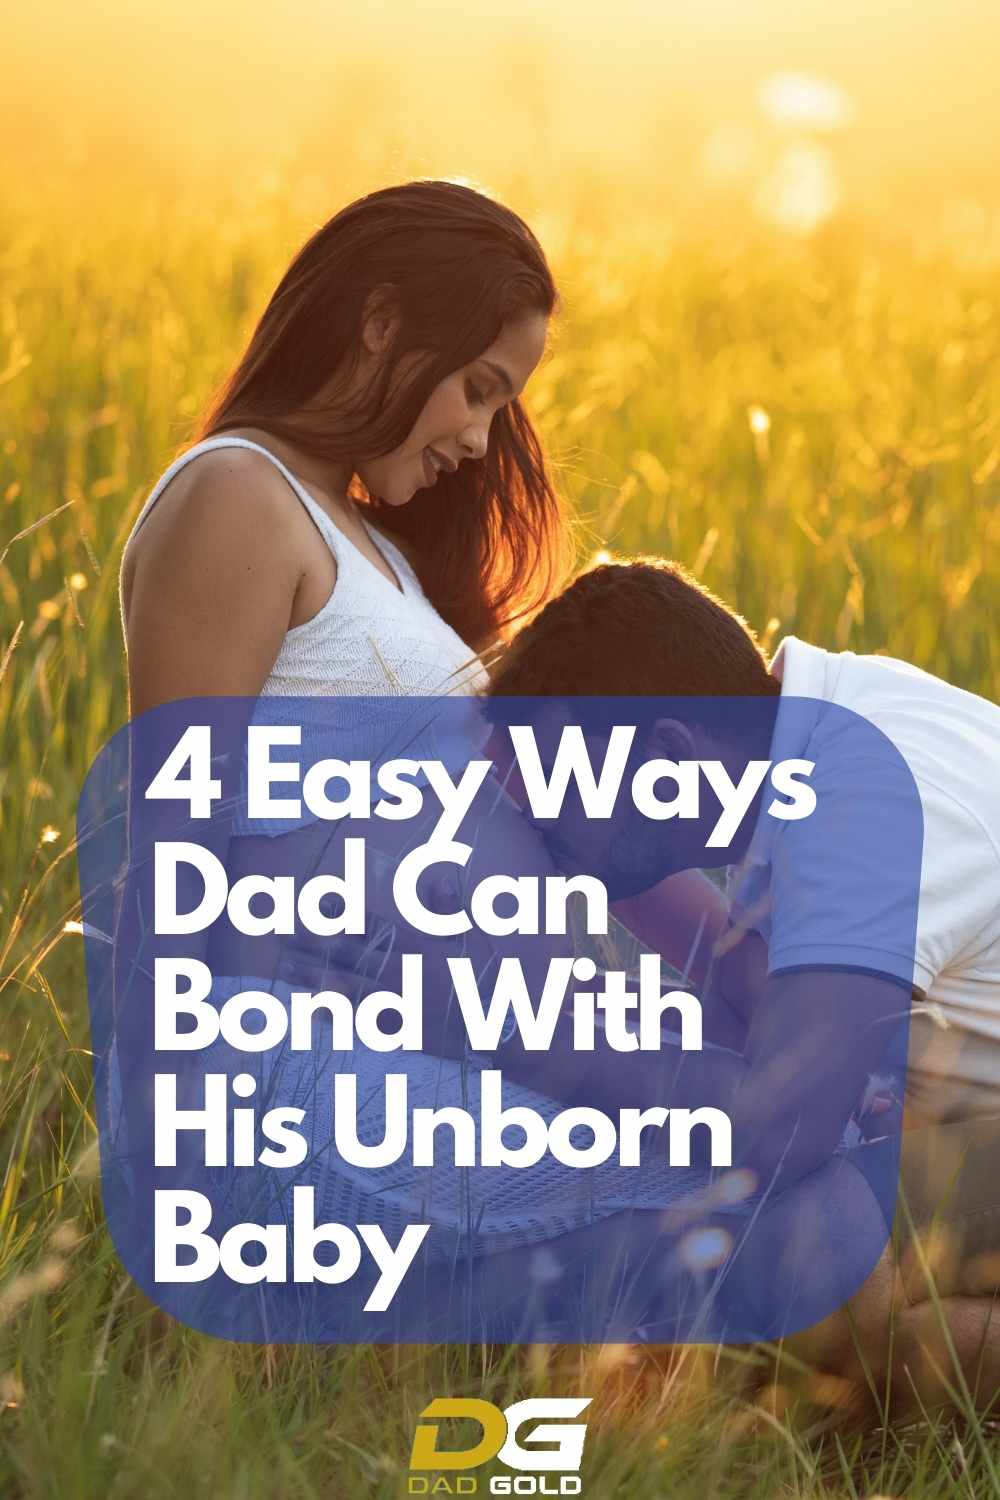 4 Easy Ways Dad Can Bond With His Unborn Baby